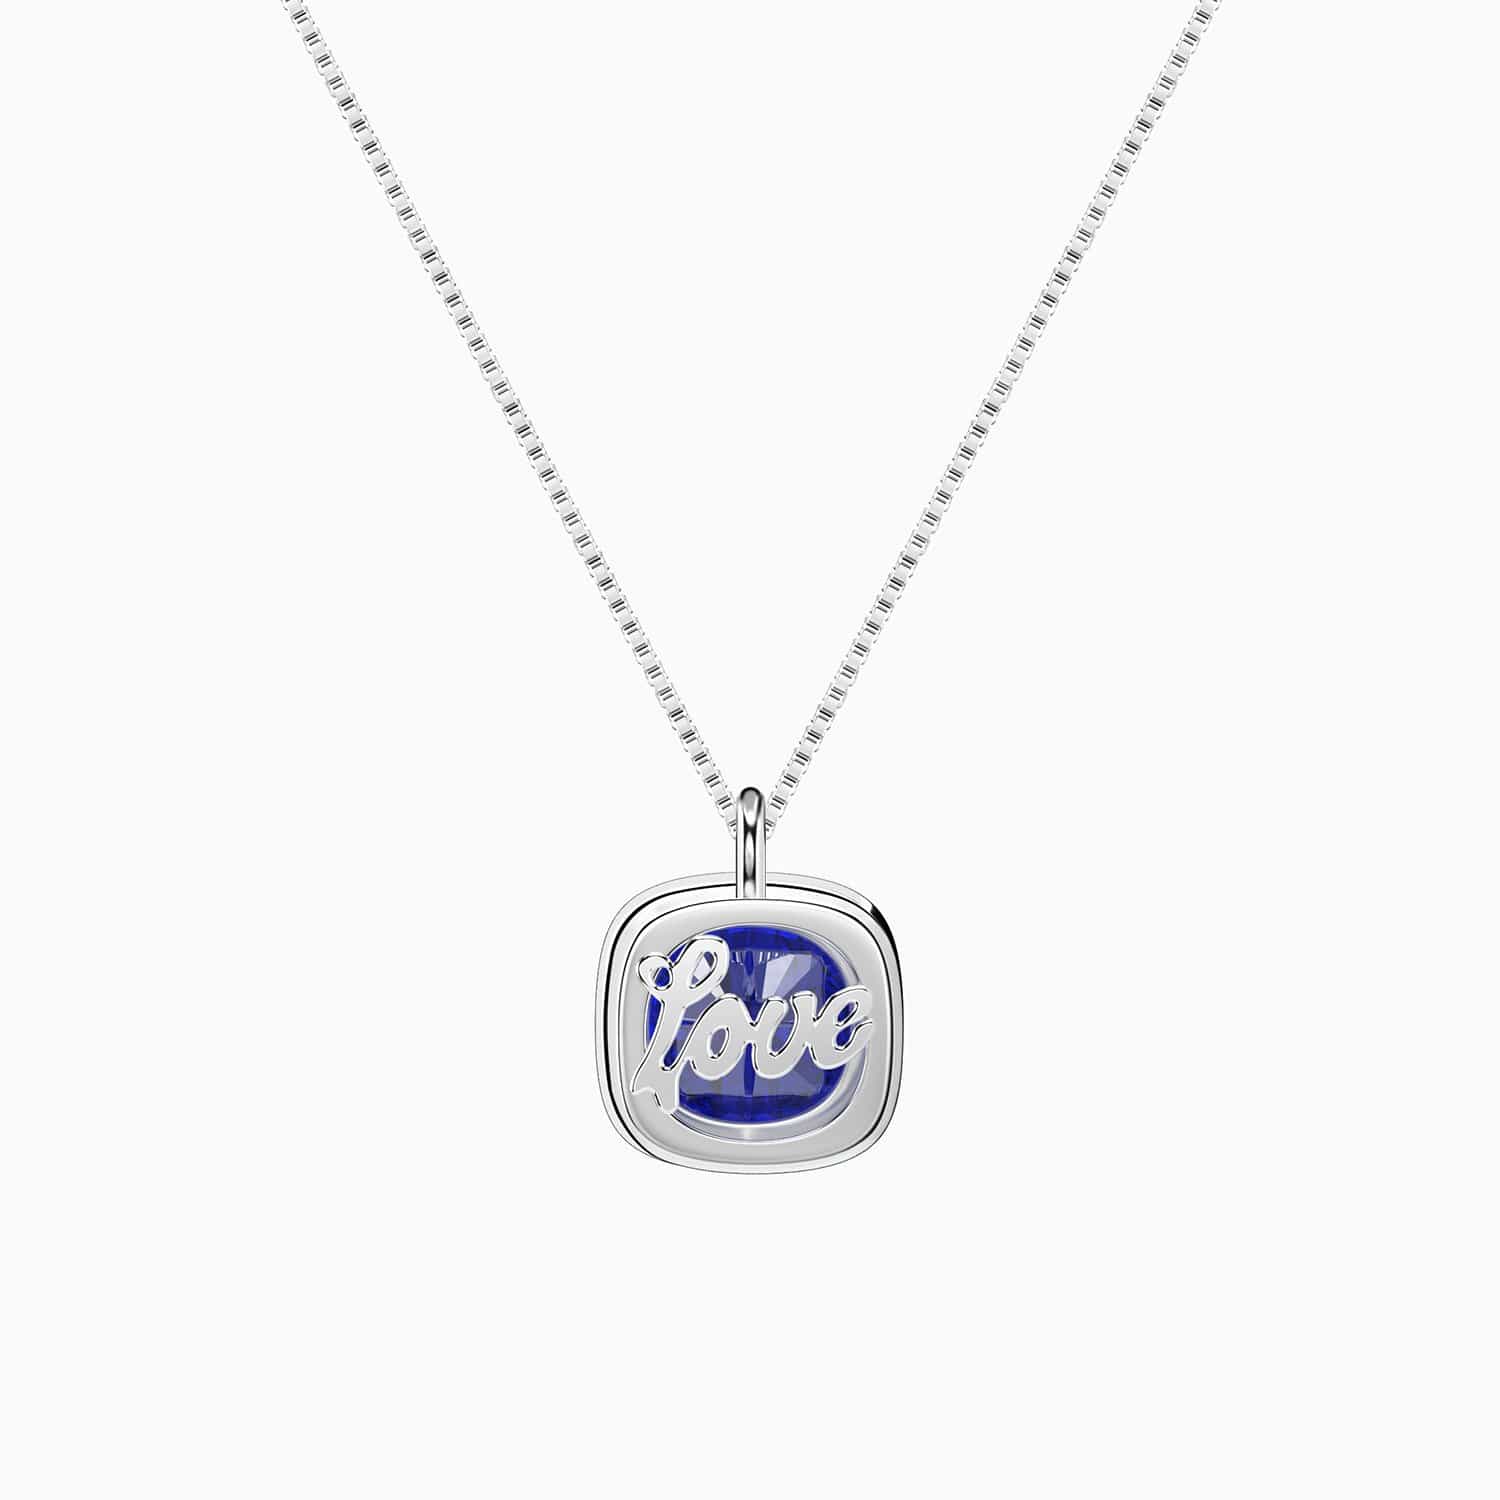 Special Gift Design Sapphire Pendant With Word Love Necklace Sterling Silver